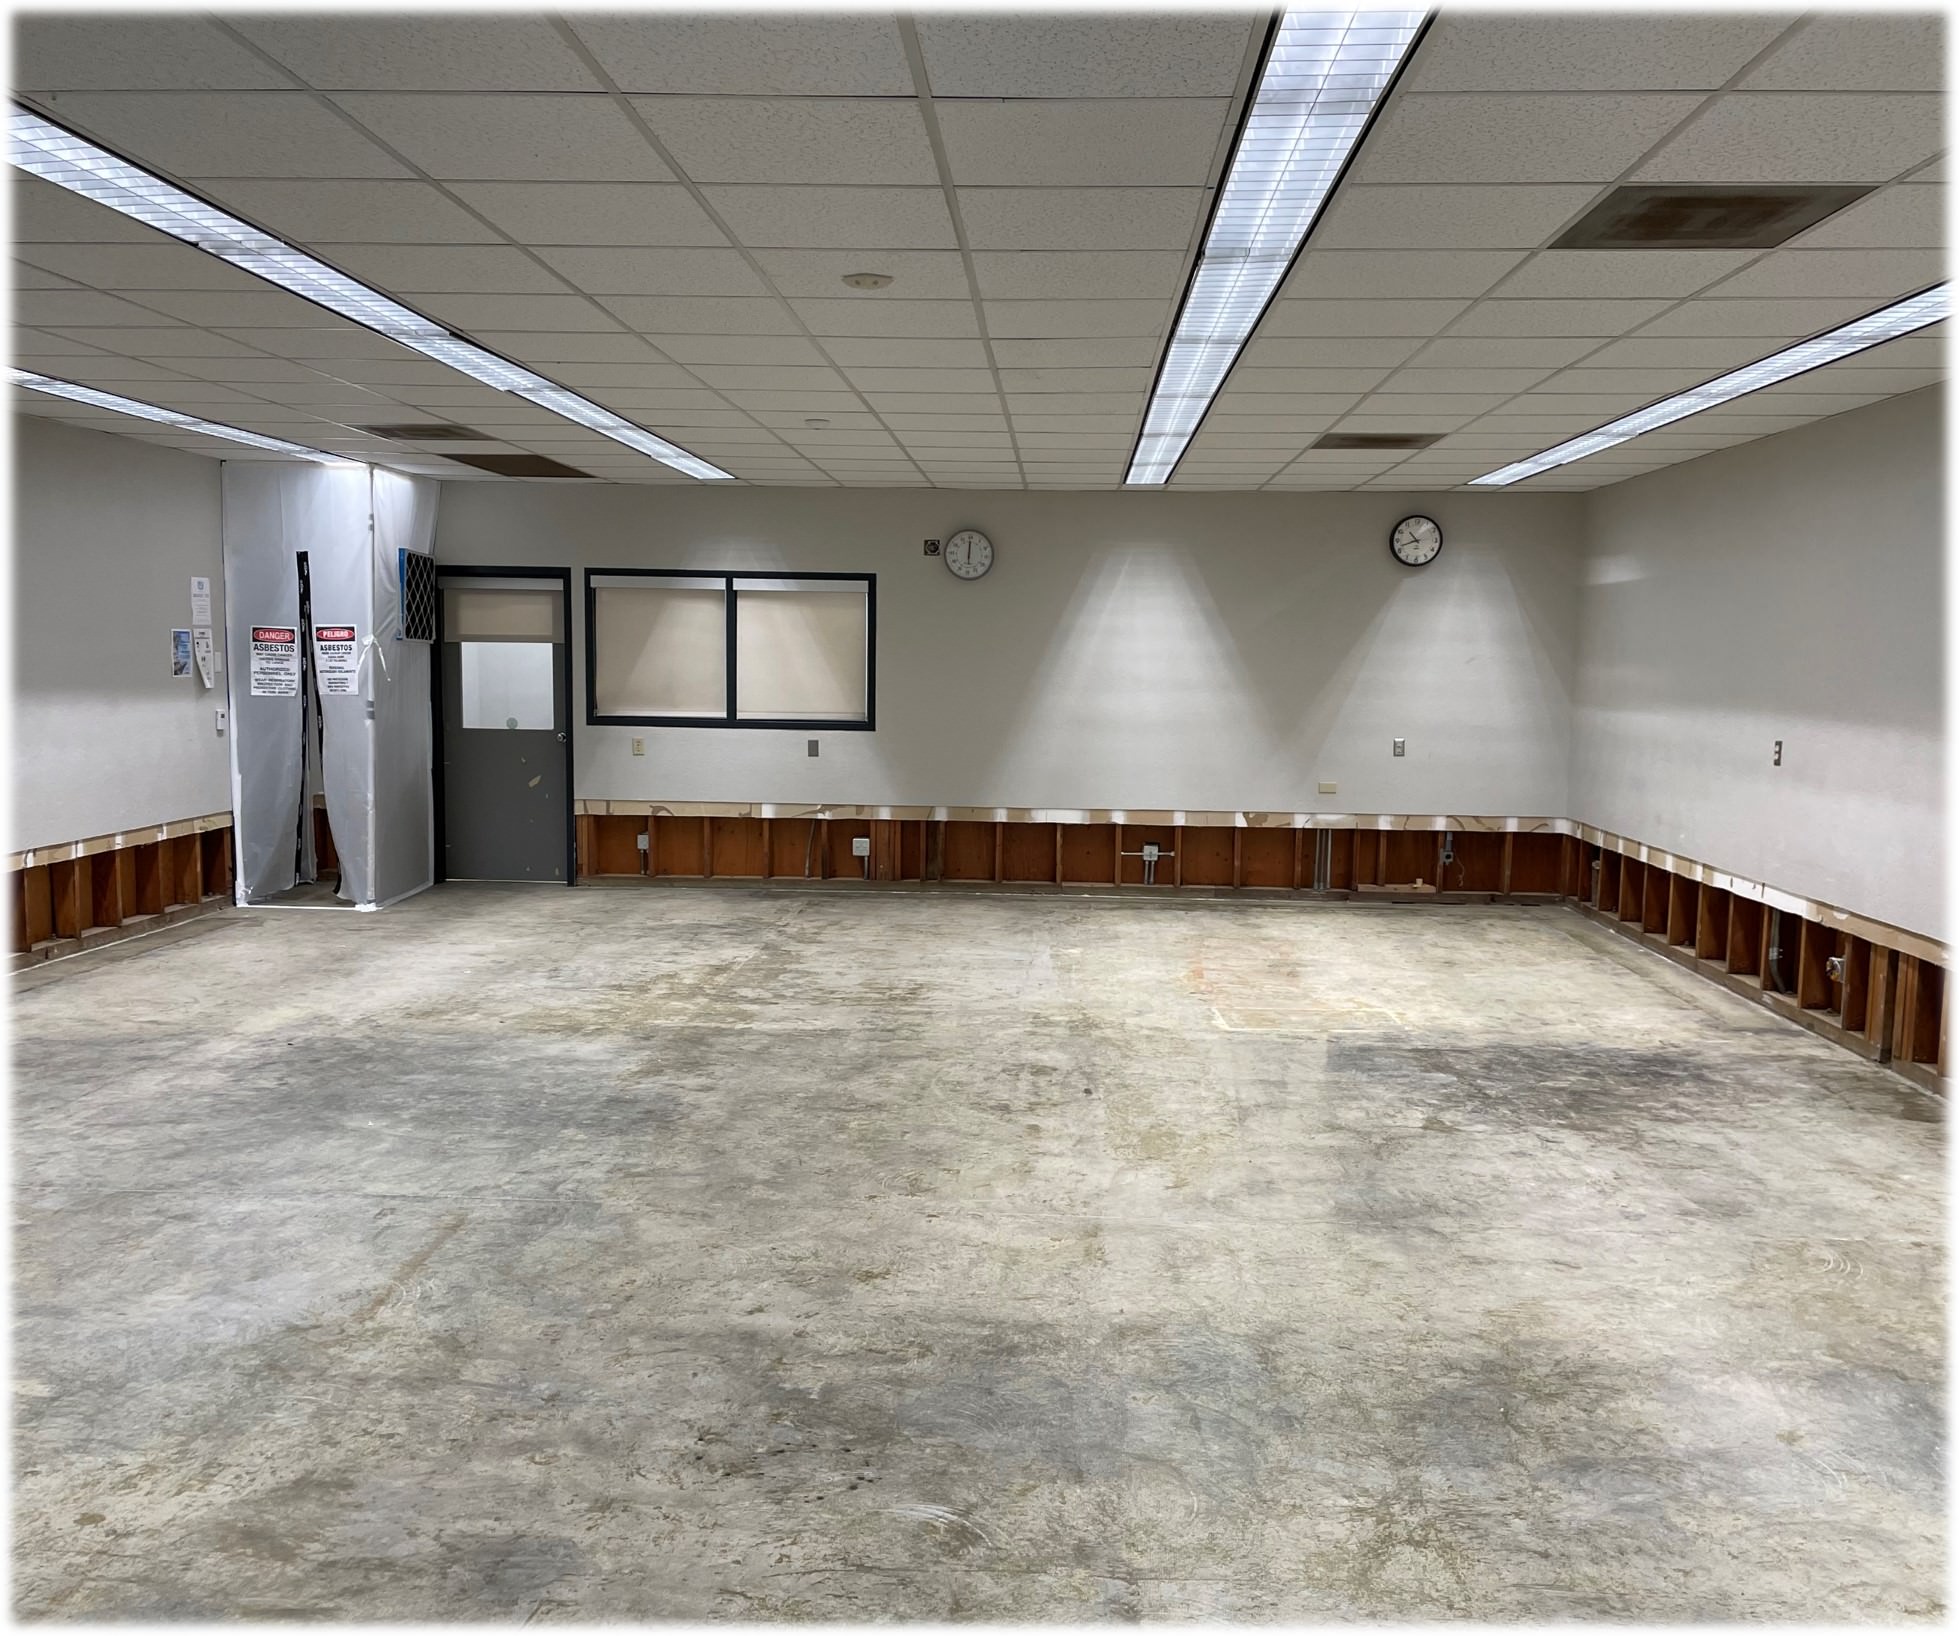 Reedley college lecture room before construction - lightbox